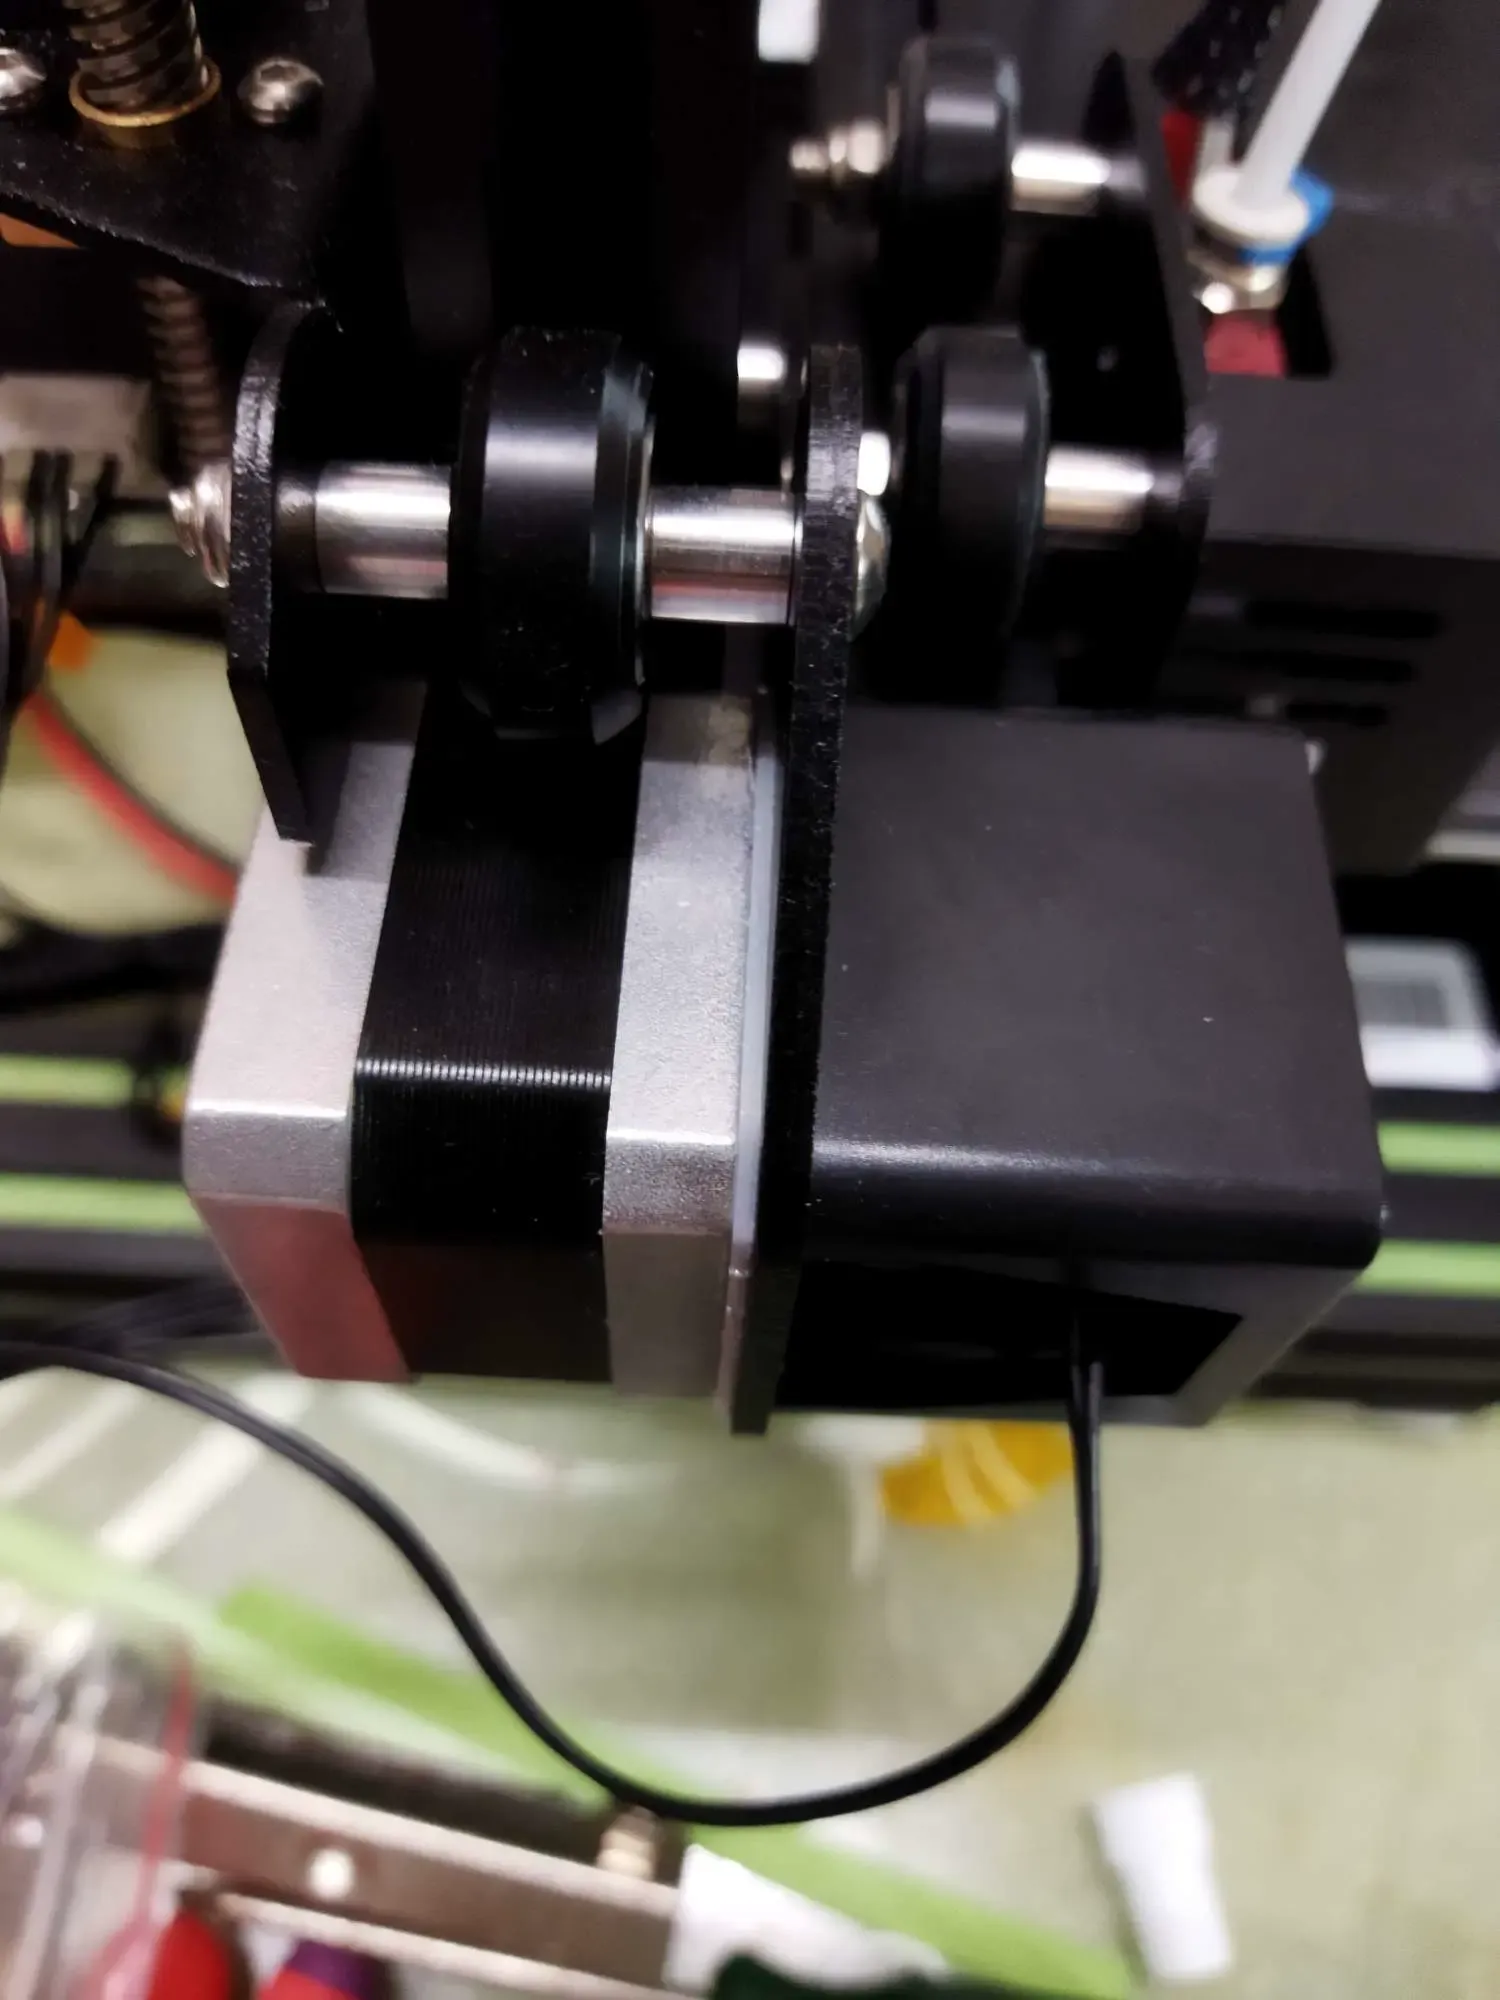 gasket use on ender3 xy motor can bequite